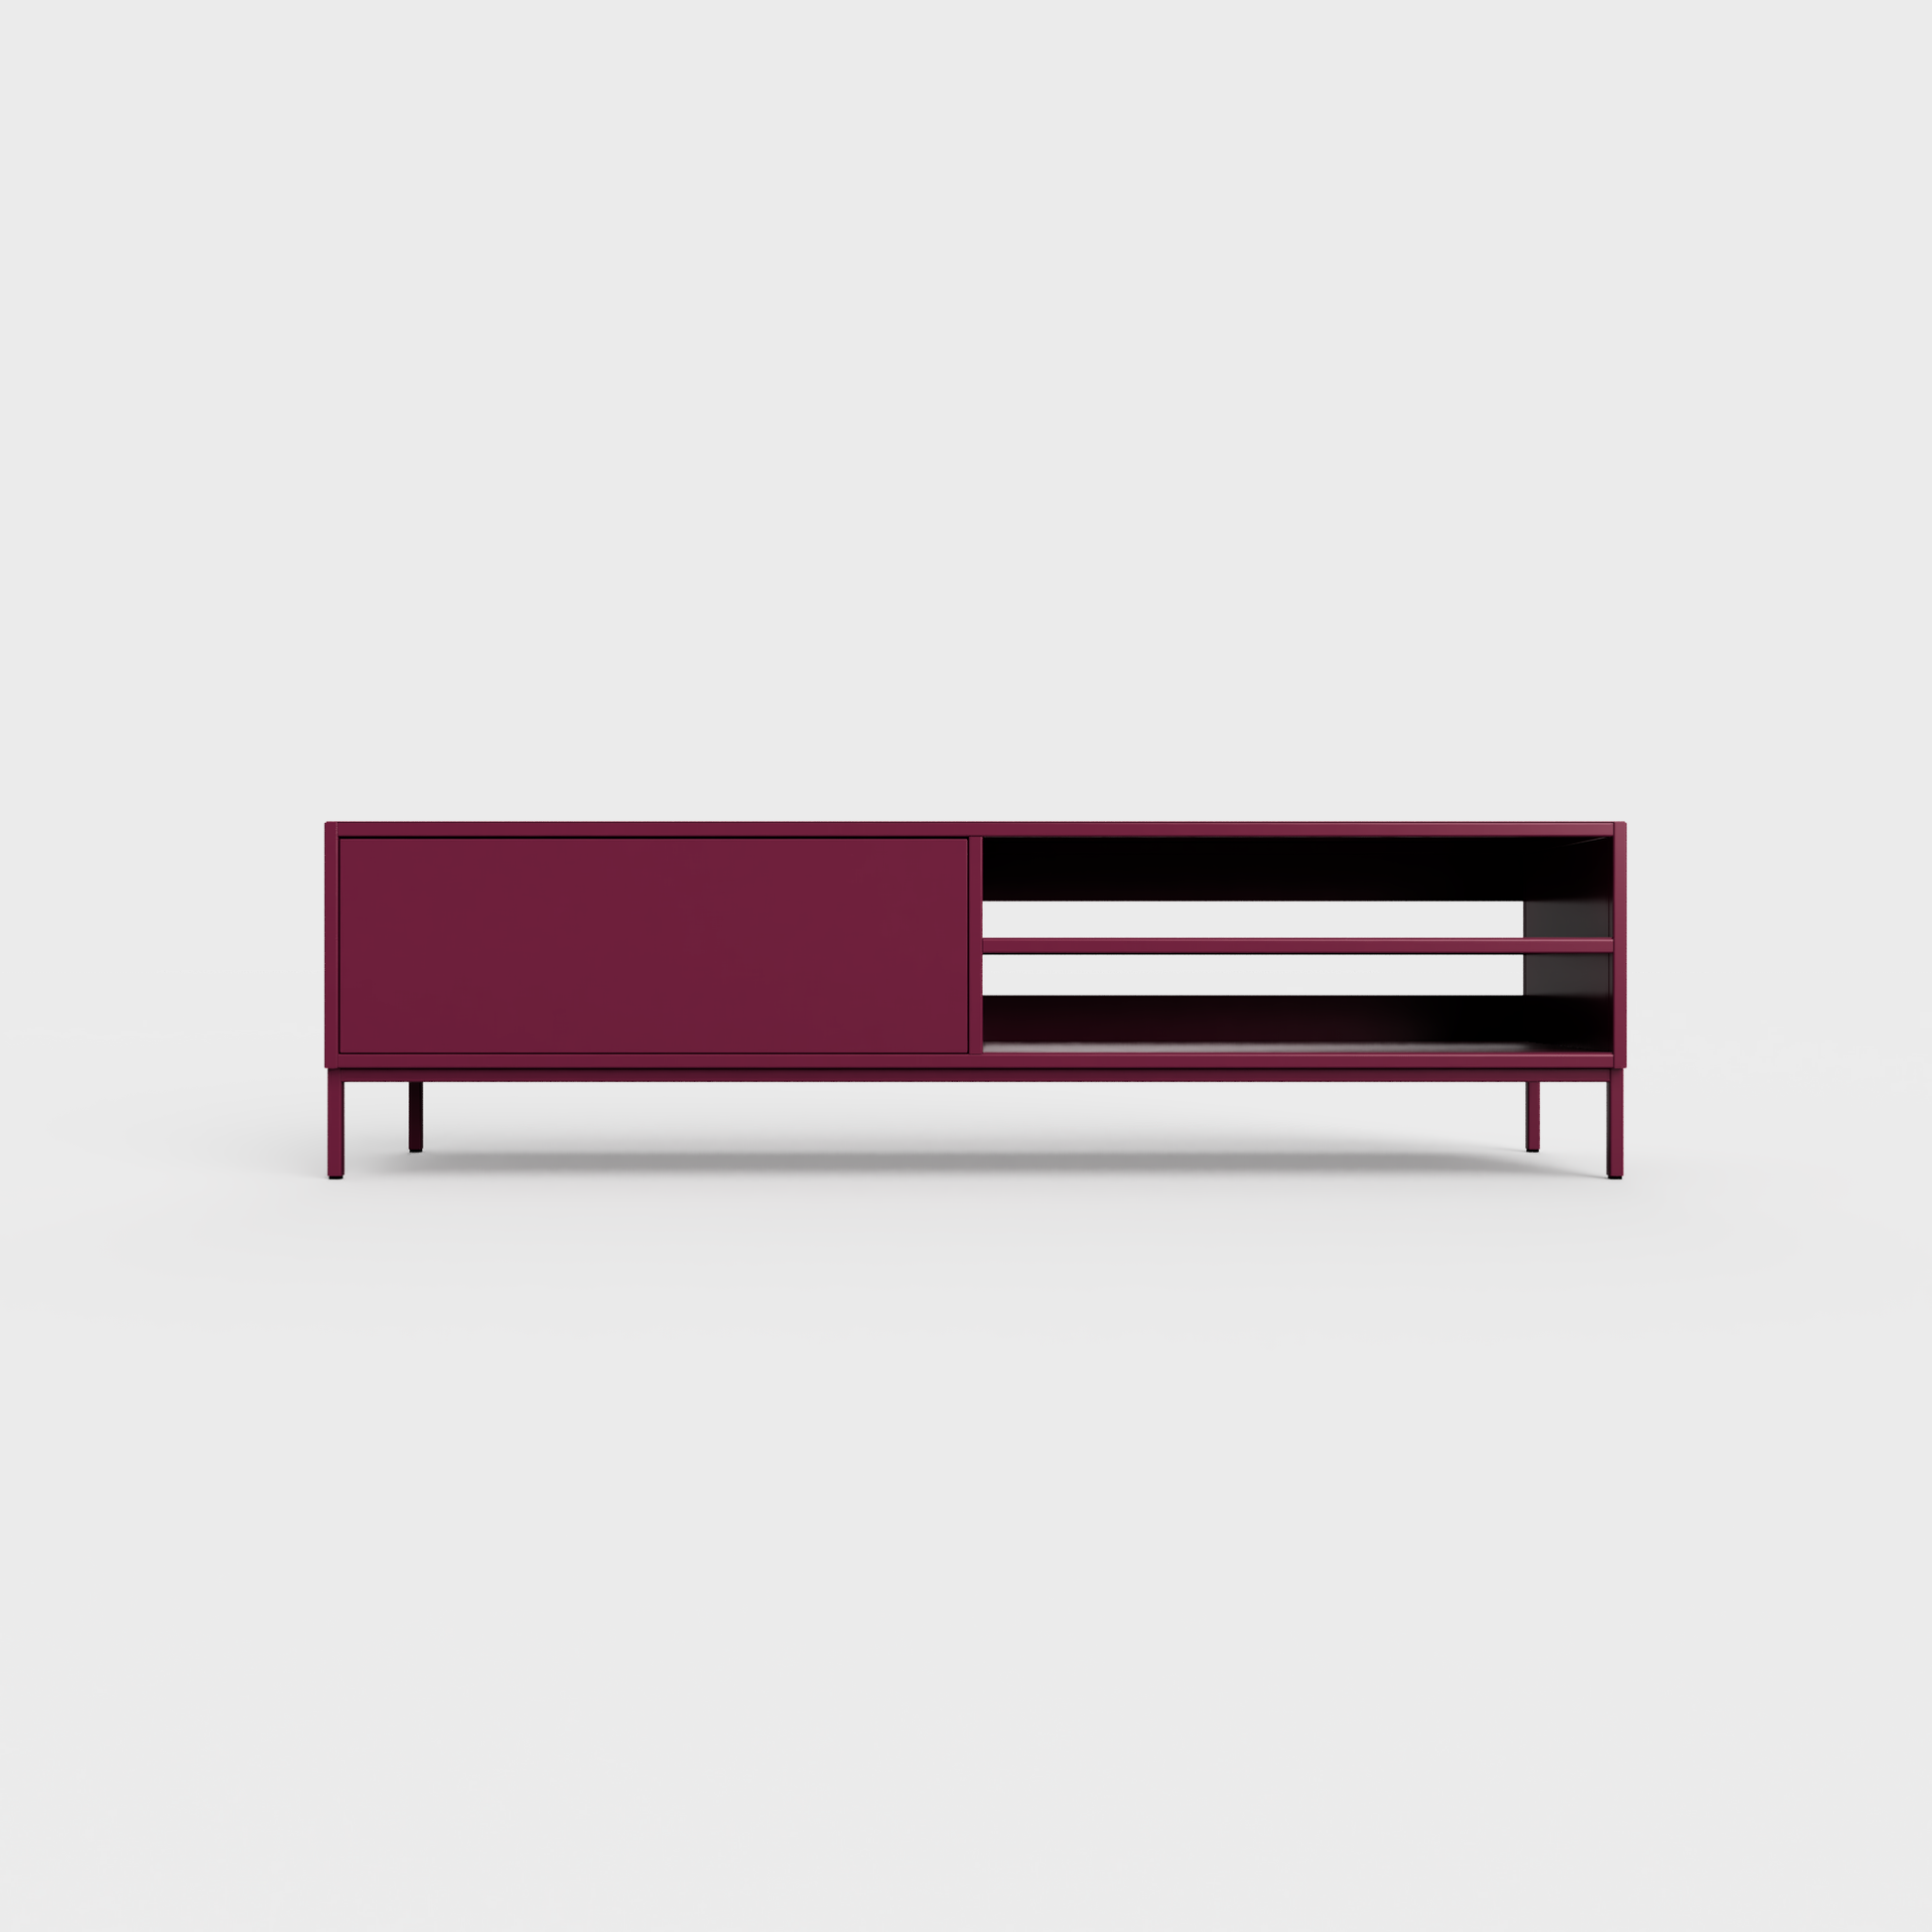 Prunus 02 Lowboard in Plum color, powder-coated steel, elegant and modern piece of furniture for your living room